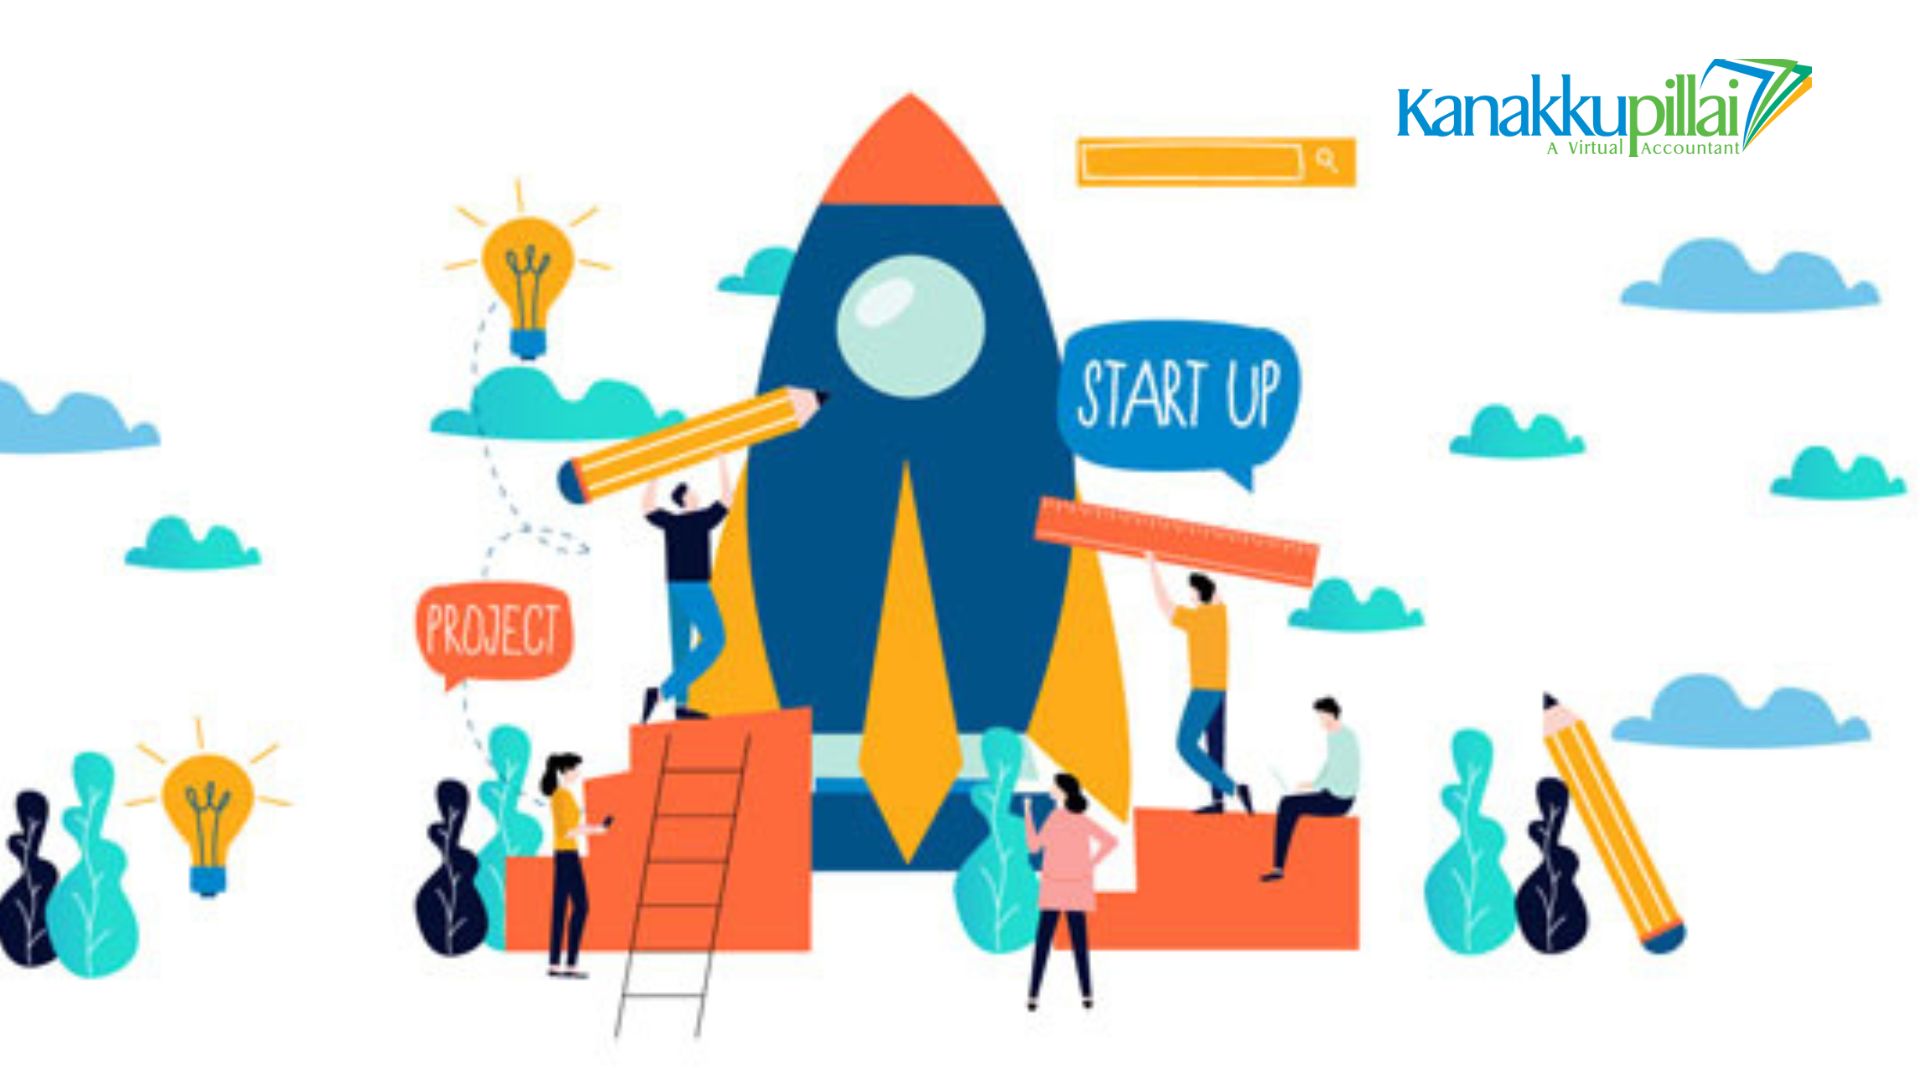 You are currently viewing Team Kanakkupillai makes Company Registration a Breezy Affair for Startups!